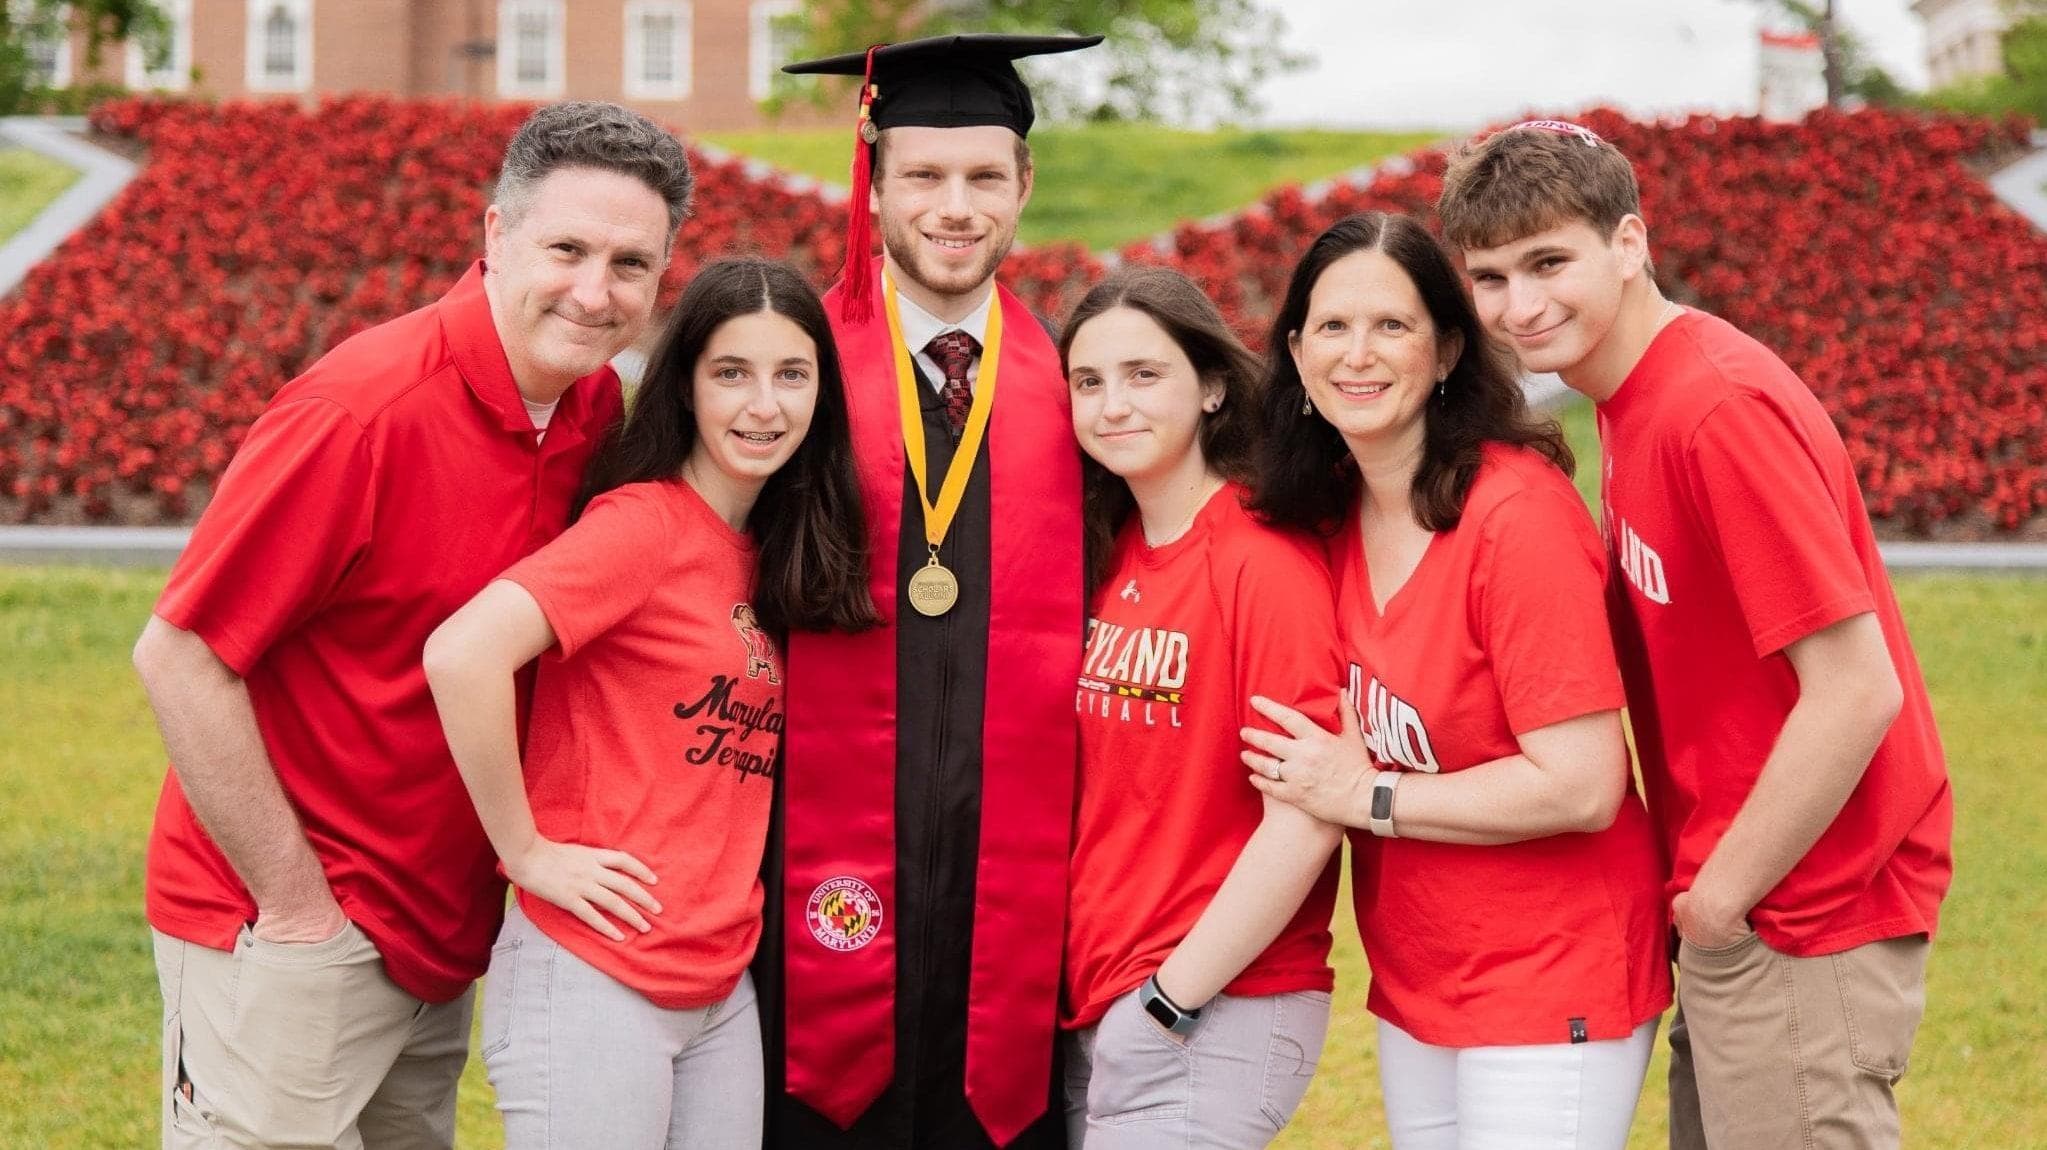 Terp couple Melissa and Mark Arking posing with their four kids